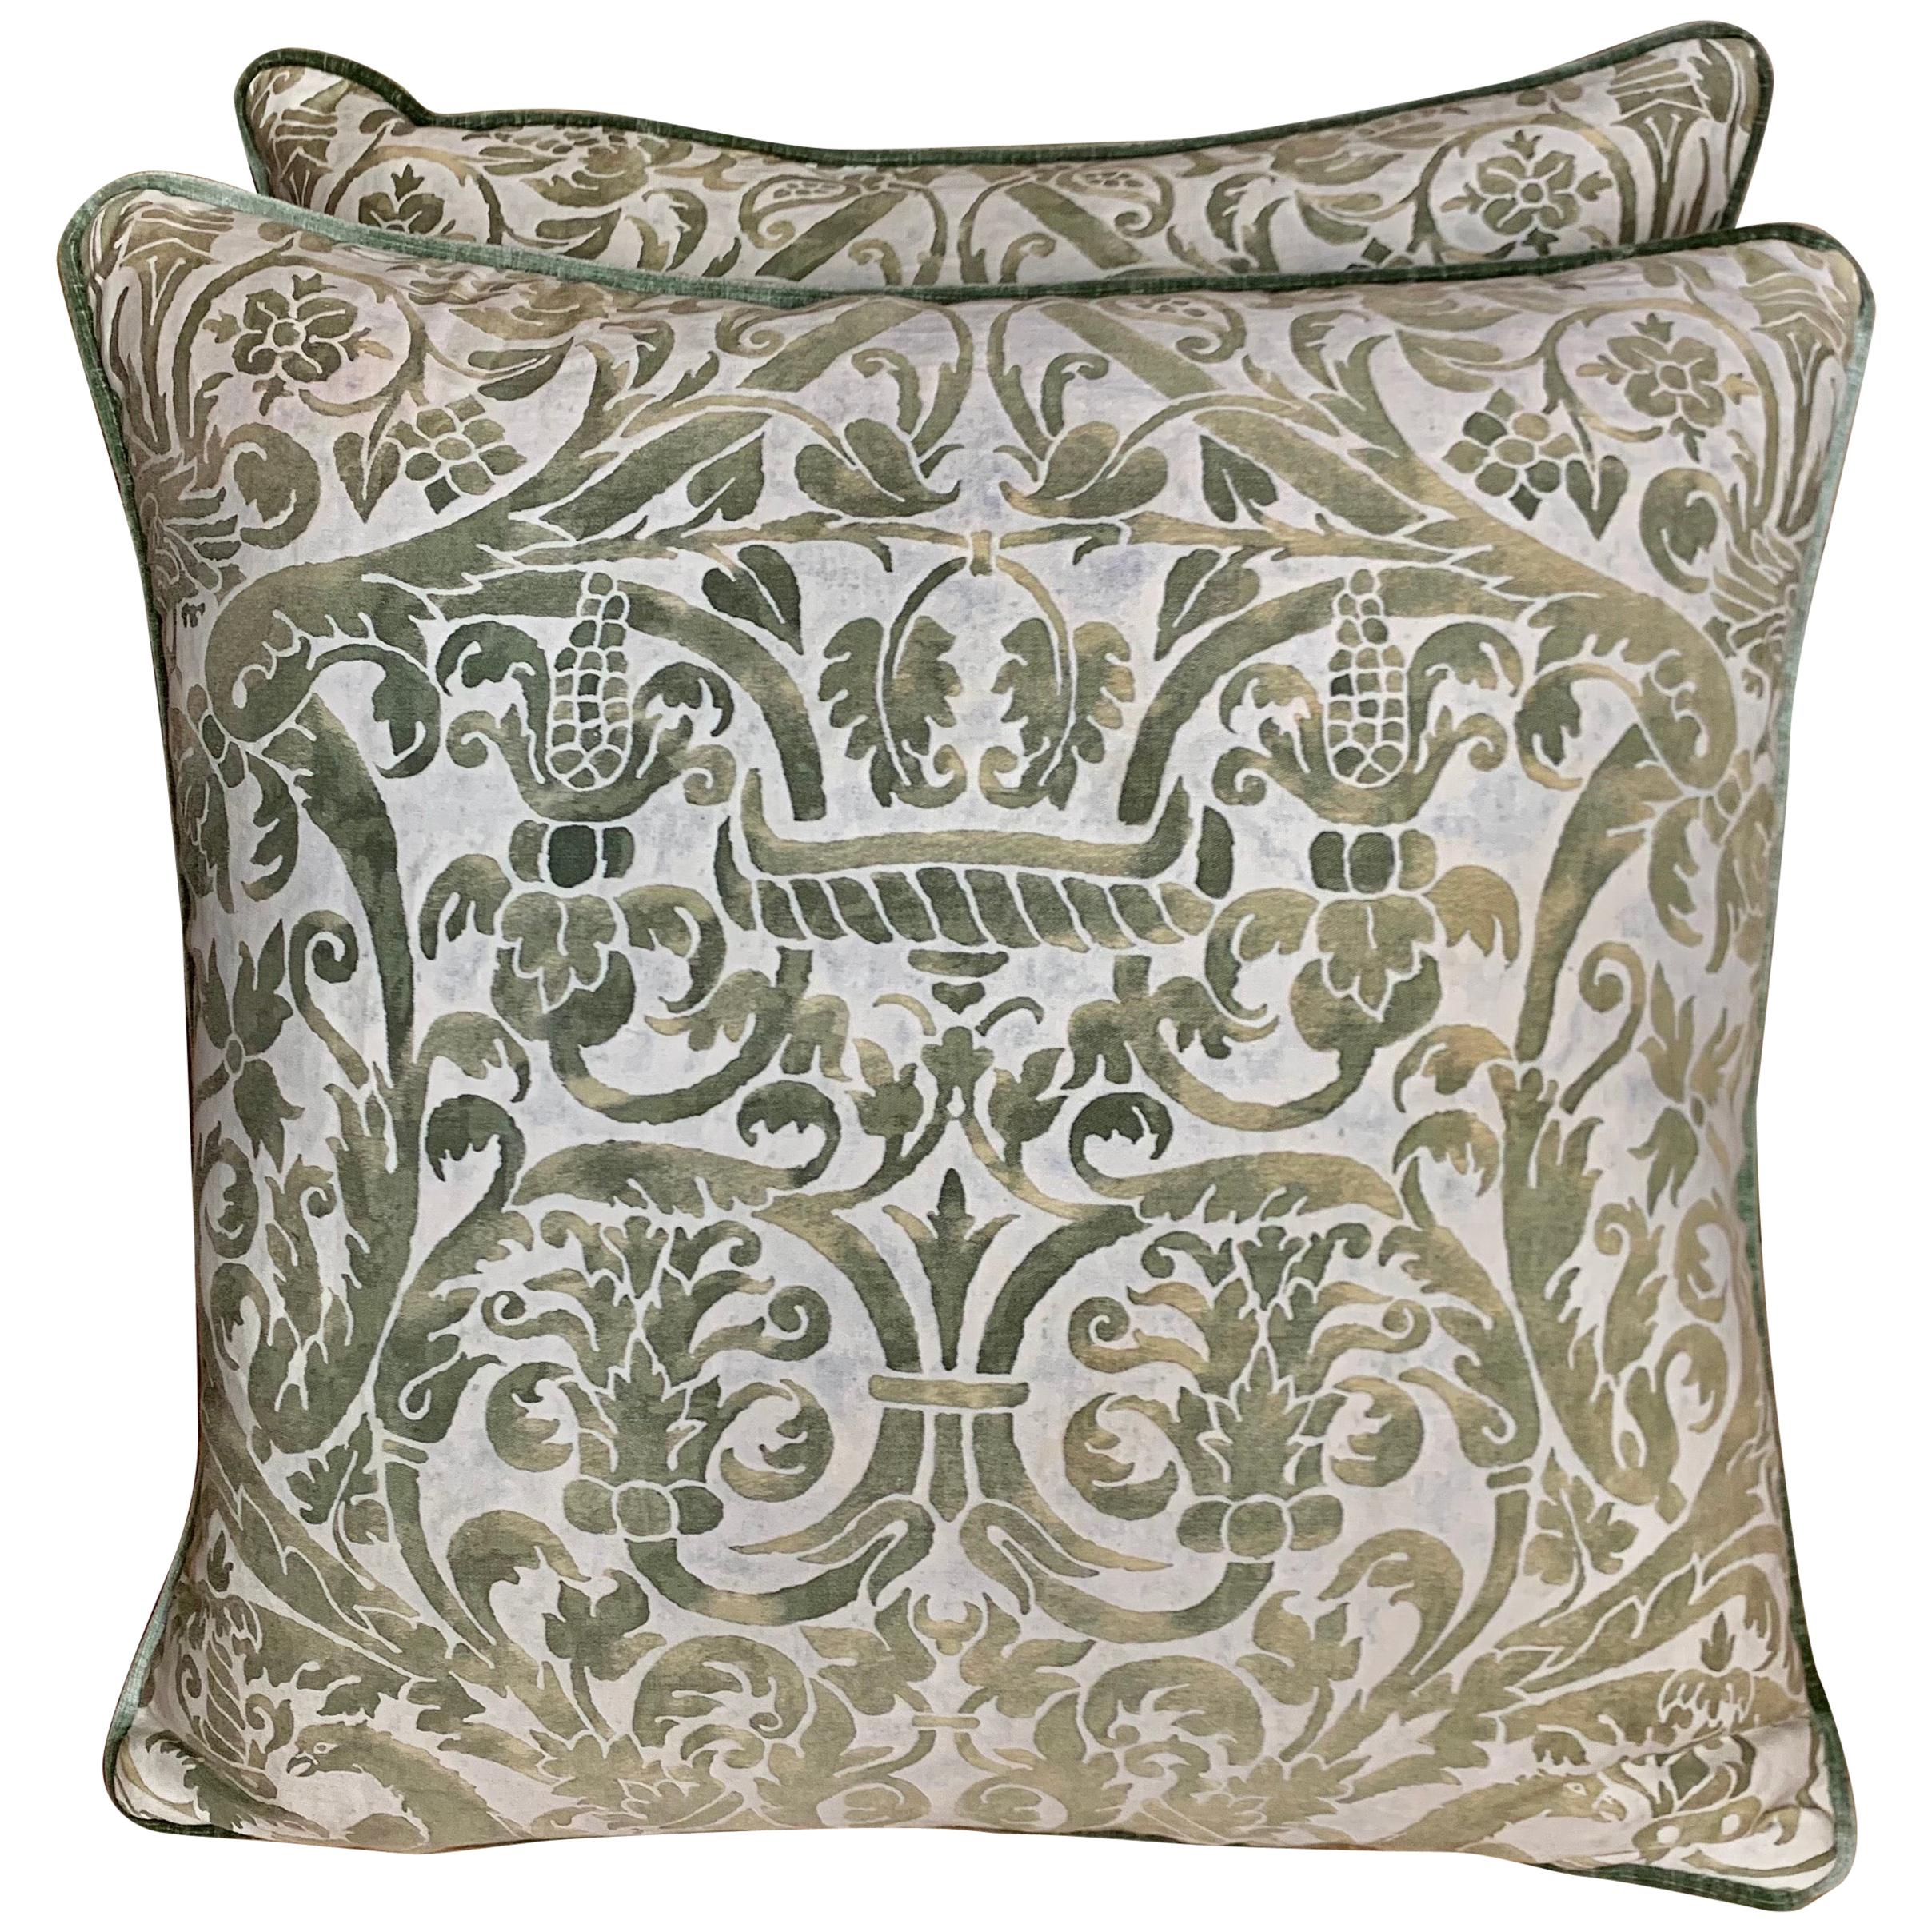 Pair of Custom Vintage Fortuny Pillows